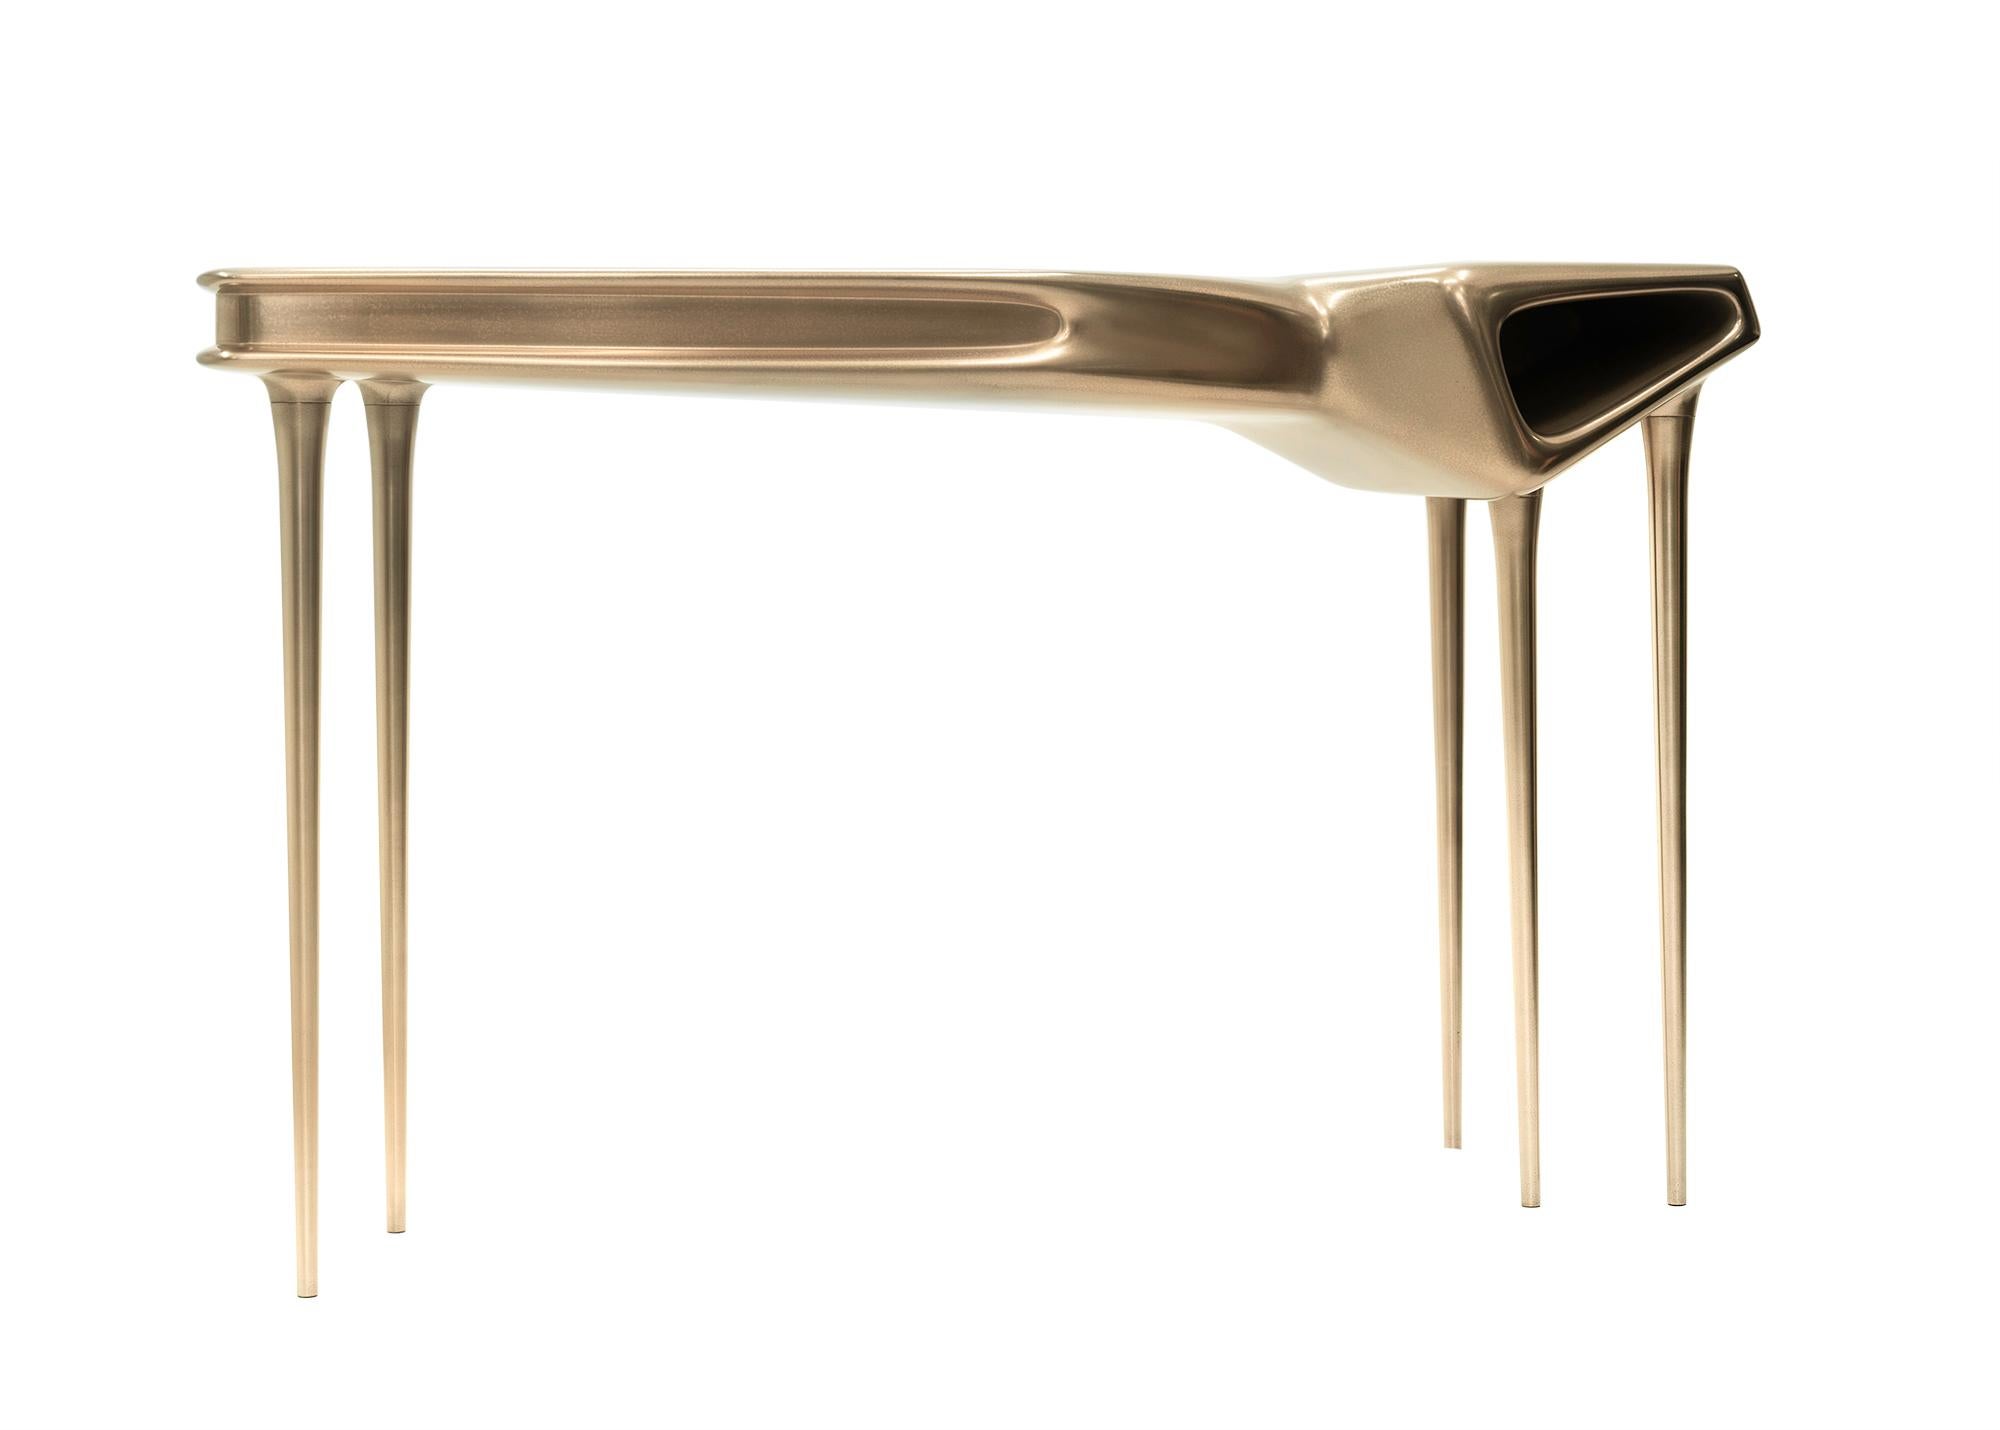 GRACE Console - 21st century unique contemporary sculpted bronze console

Pleased to meet you, Your Grace…

The unique form of the Grace console design is masterfully accentuated with the innovative approach to its liquid metal bronze finish.